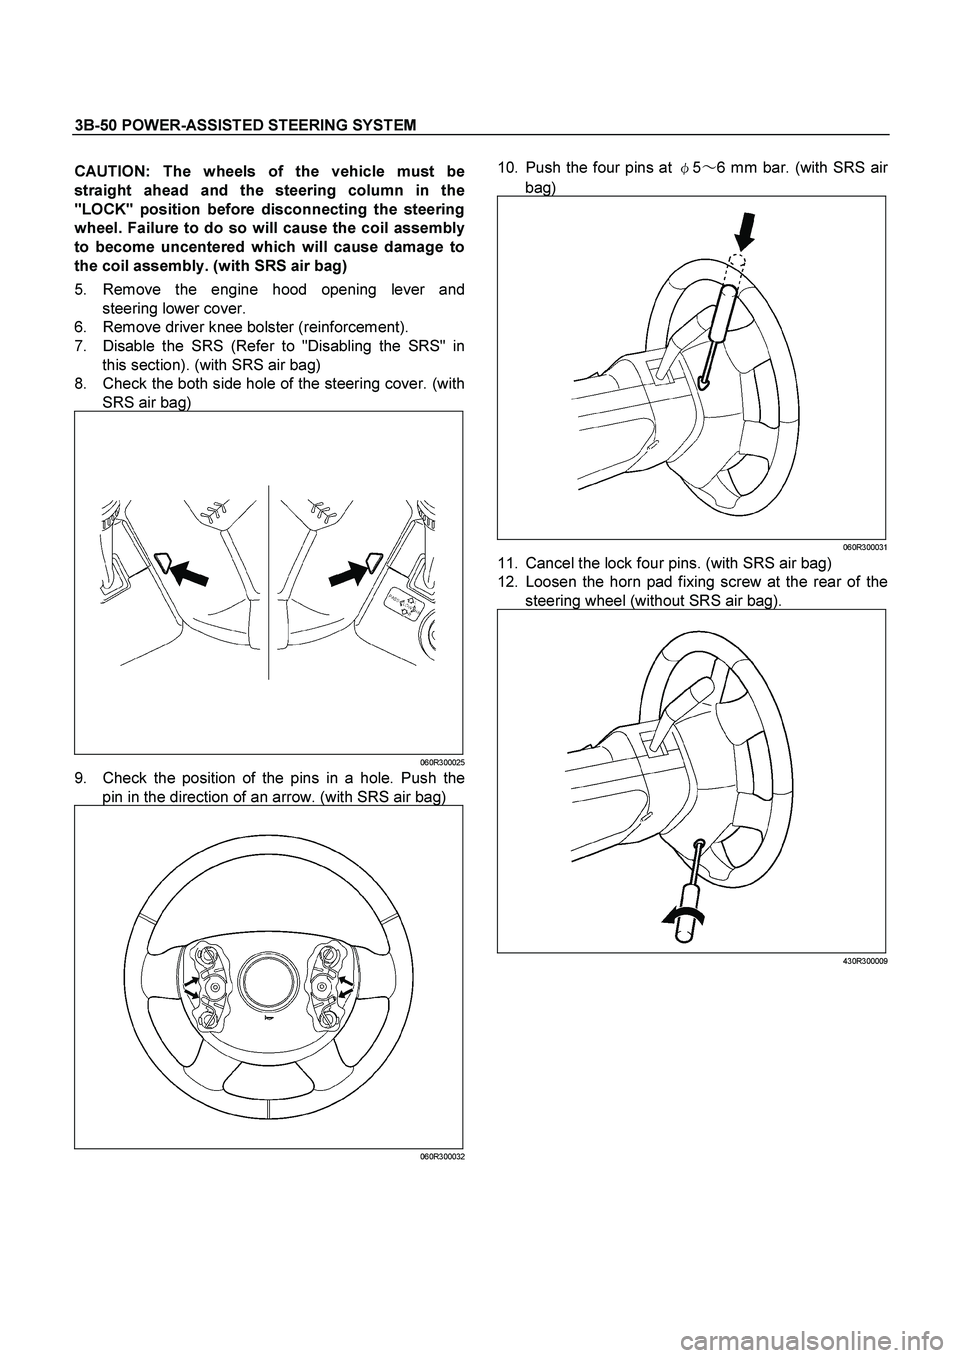 ISUZU TF SERIES 2004  Workshop Manual 3B-50 POWER-ASSISTED STEERING SYSTEM
 
CAUTION: The wheels of the vehicle must be
straight ahead and the steering column in the
"LOCK" position before disconnecting the steering
wheel. Failure to do s